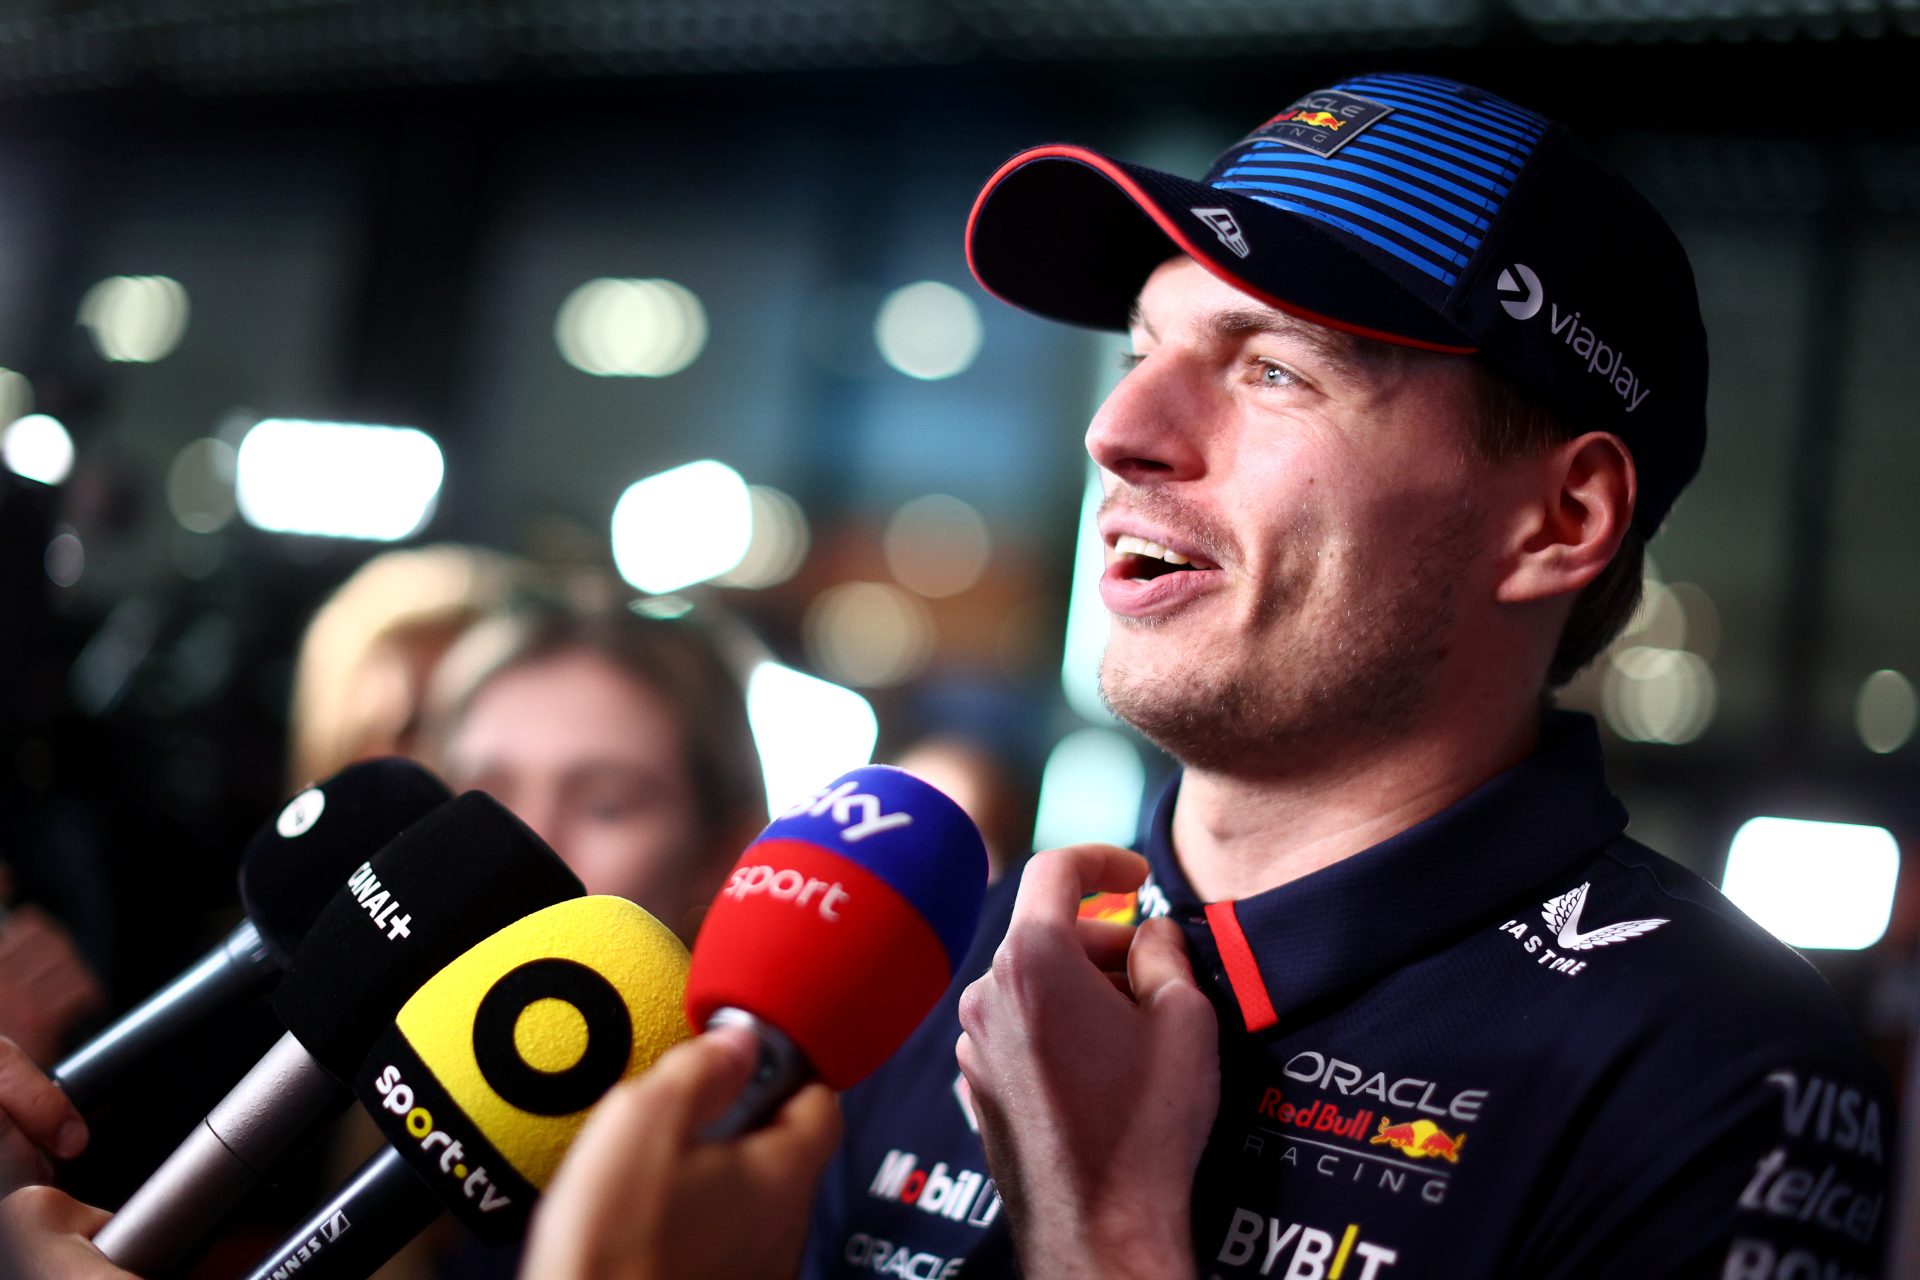 F1 star Max Verstappen speaks into a forest of media microphones in front of him. He has a smile and looks slightly above the heads of his unseen questioners and is clad head to toe in sponsor-logo gear.